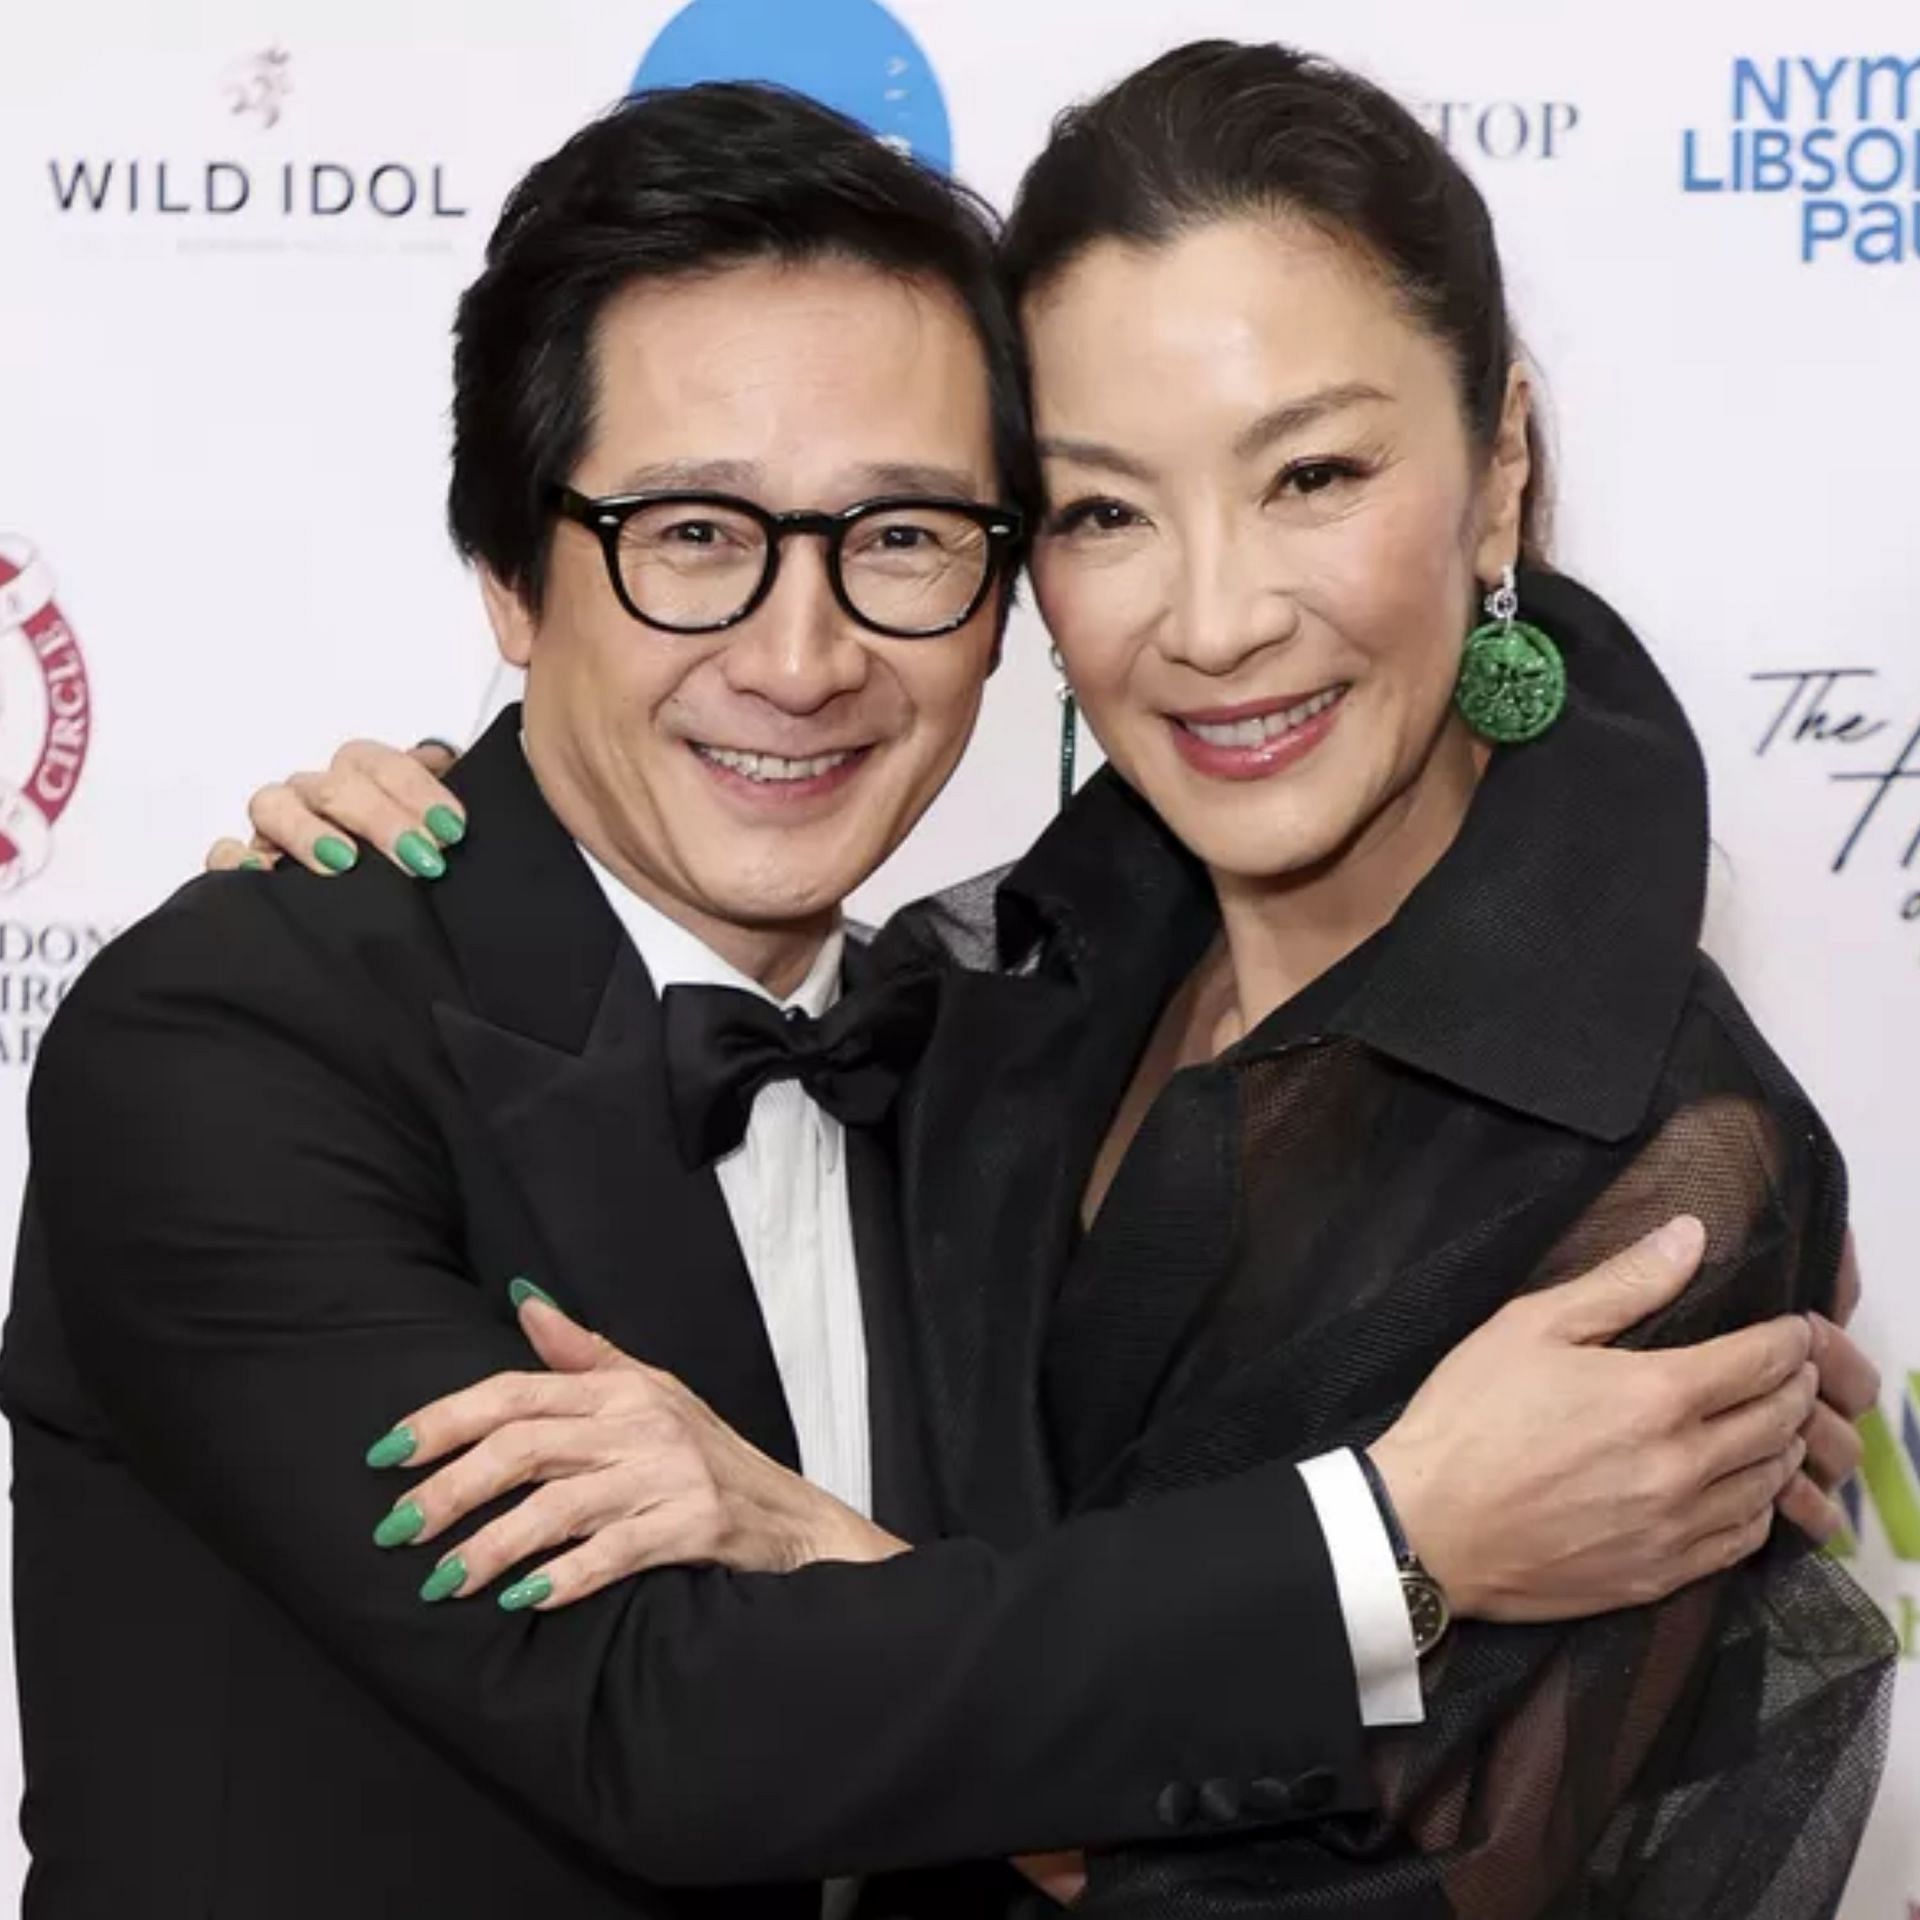 Ke Huy Quan with his co-star Michelle Yeoh (Image via Getty Images)